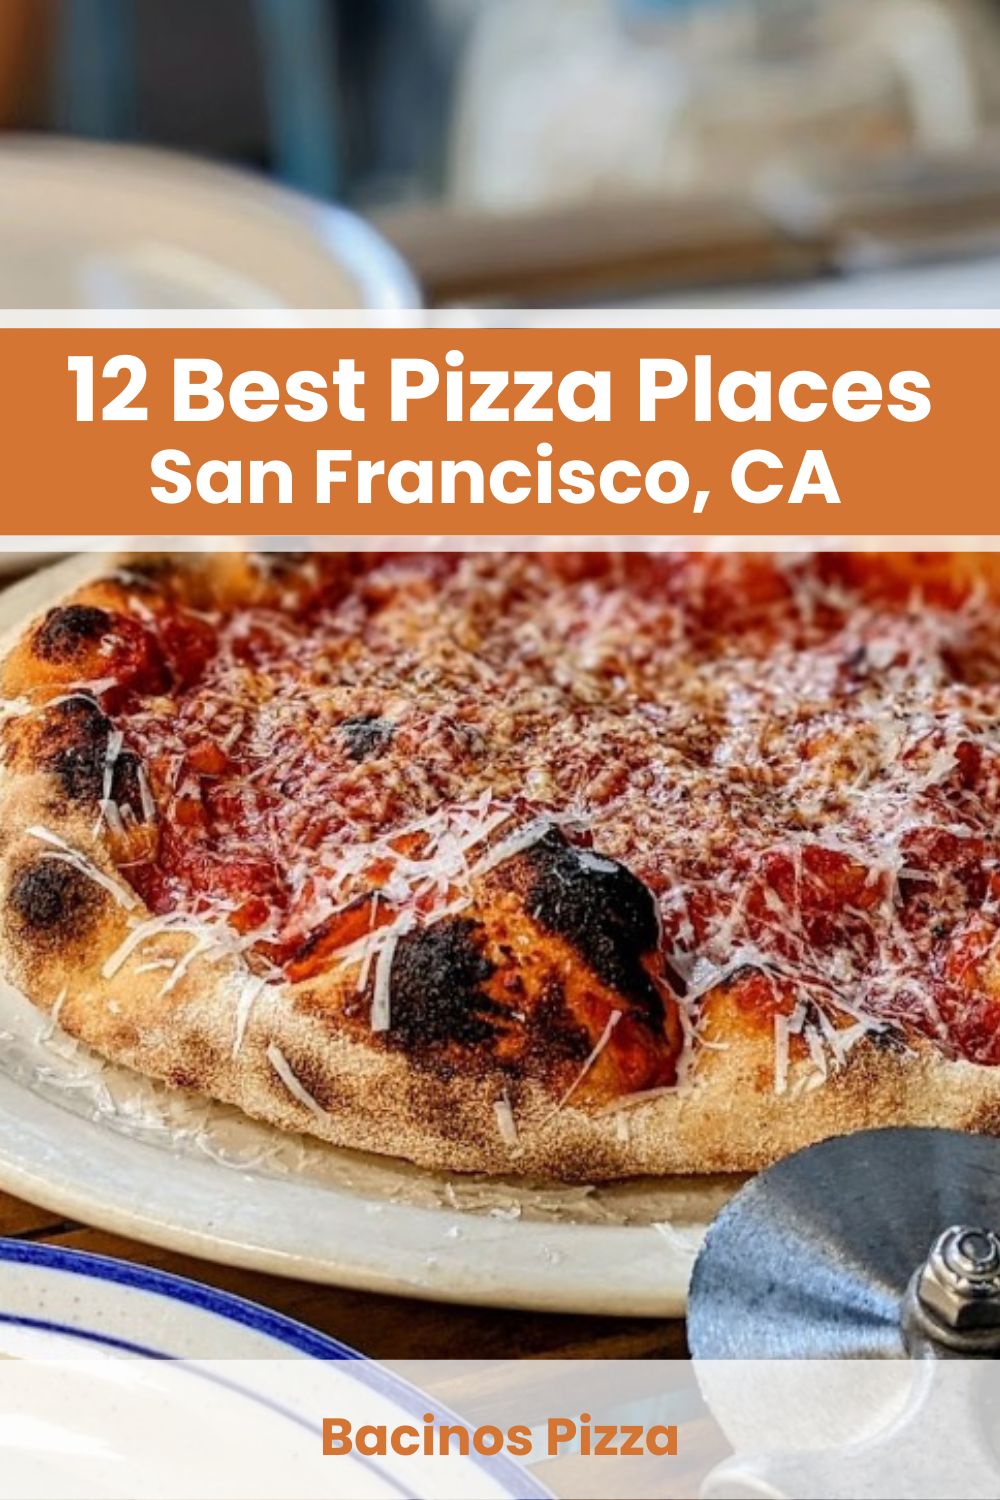 Best Pizza Places in San Francisco